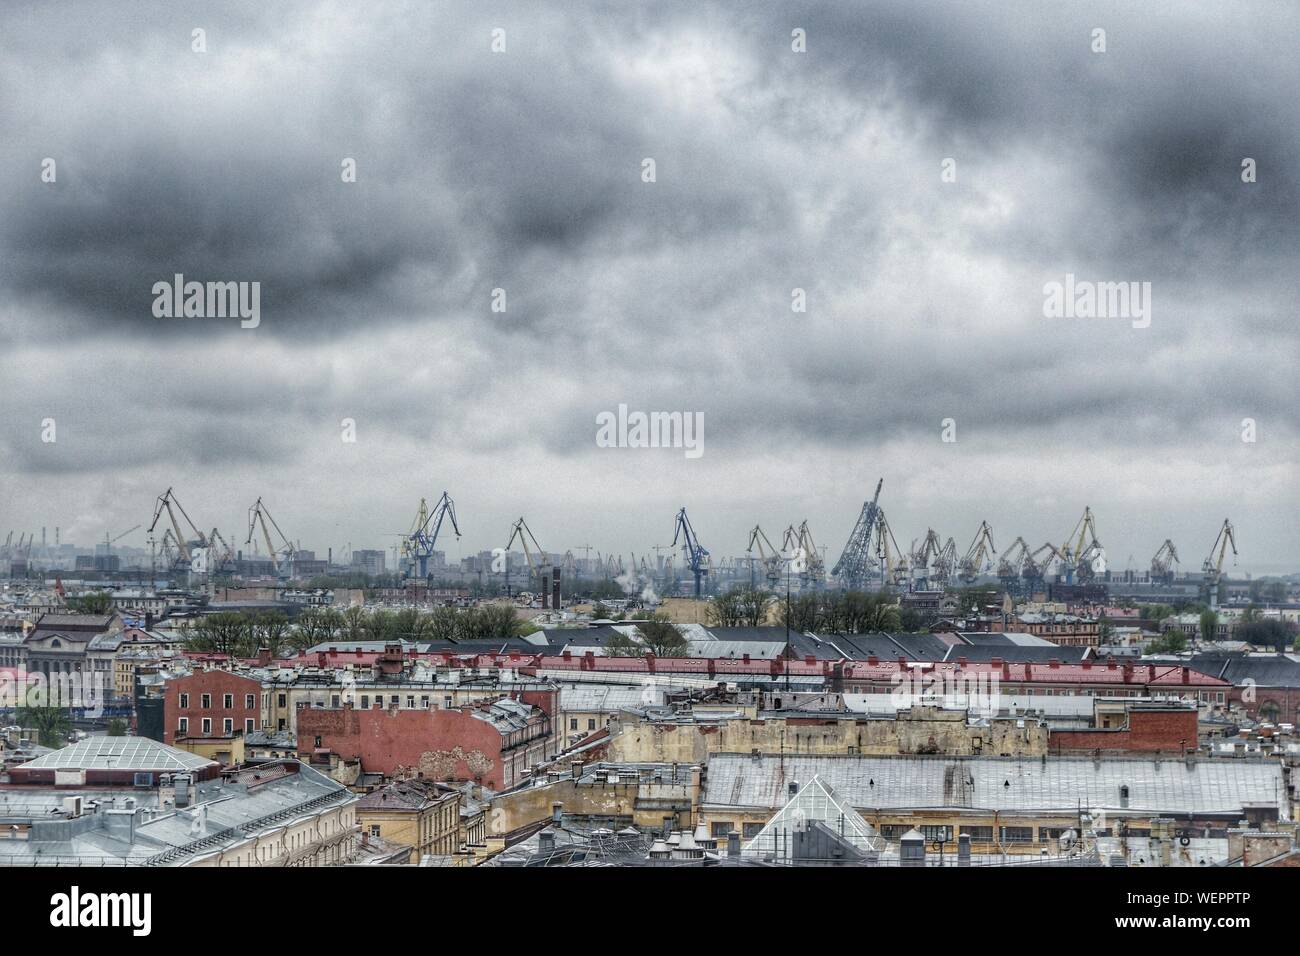 High Angle View Of Industrial Area Against Storm Clouds Stock Photo